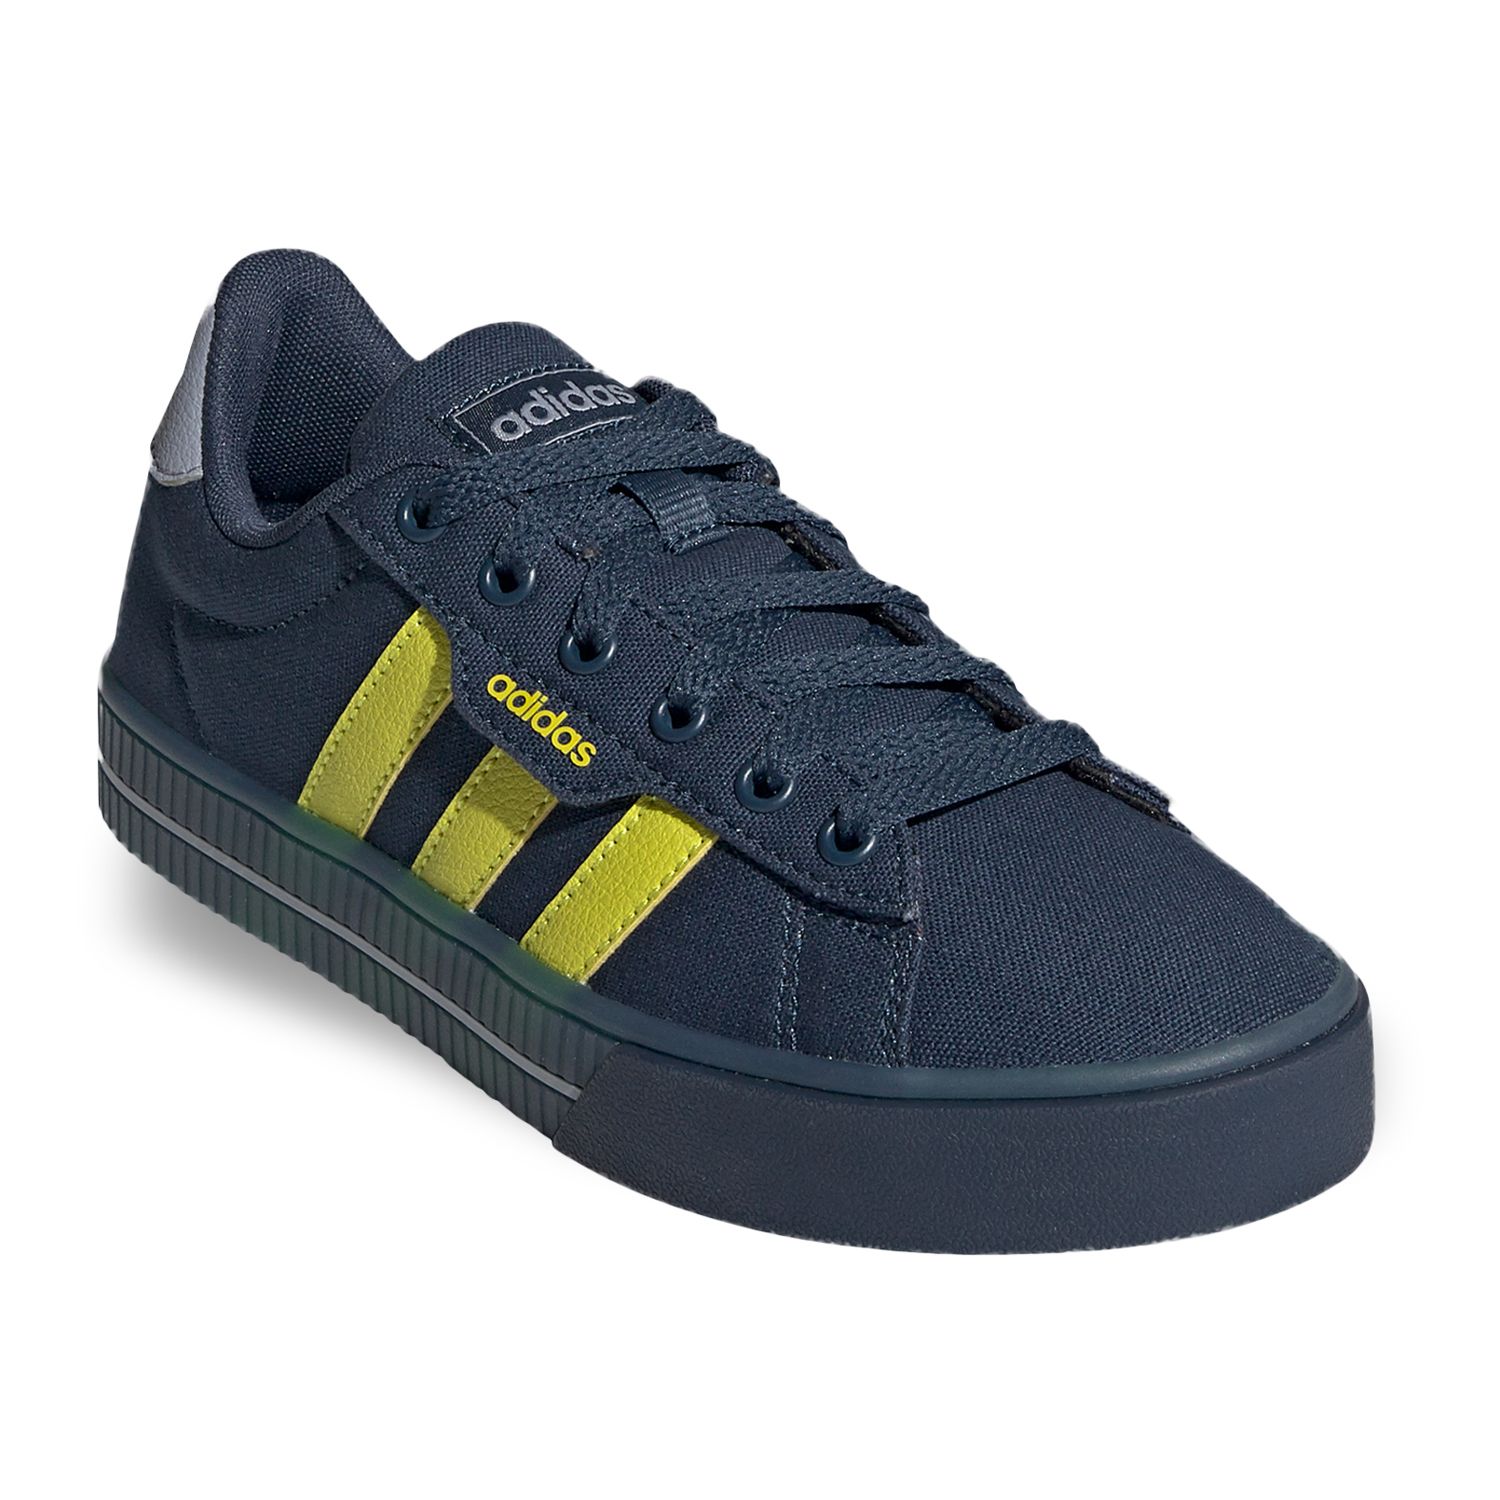 adidas Daily 3.0 Kids' Sneakers